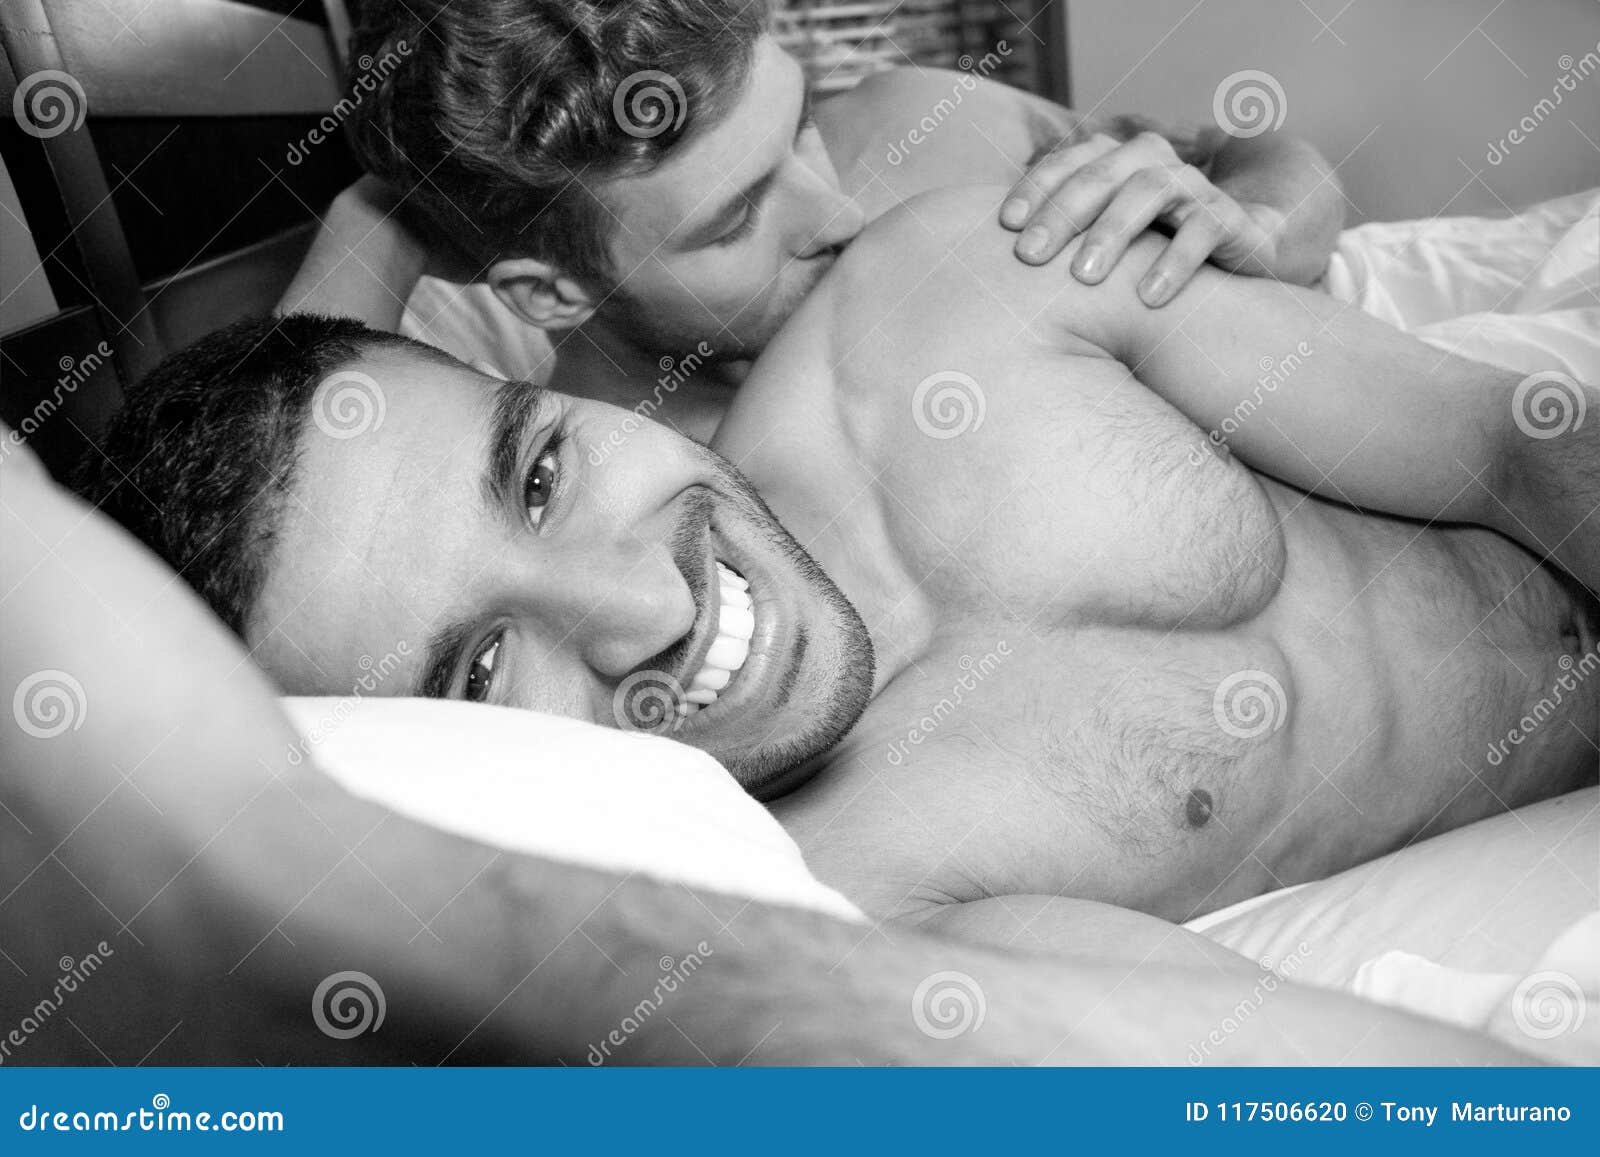 Photo about Two handsome gay men, nude in bed together cuddling and smiling...